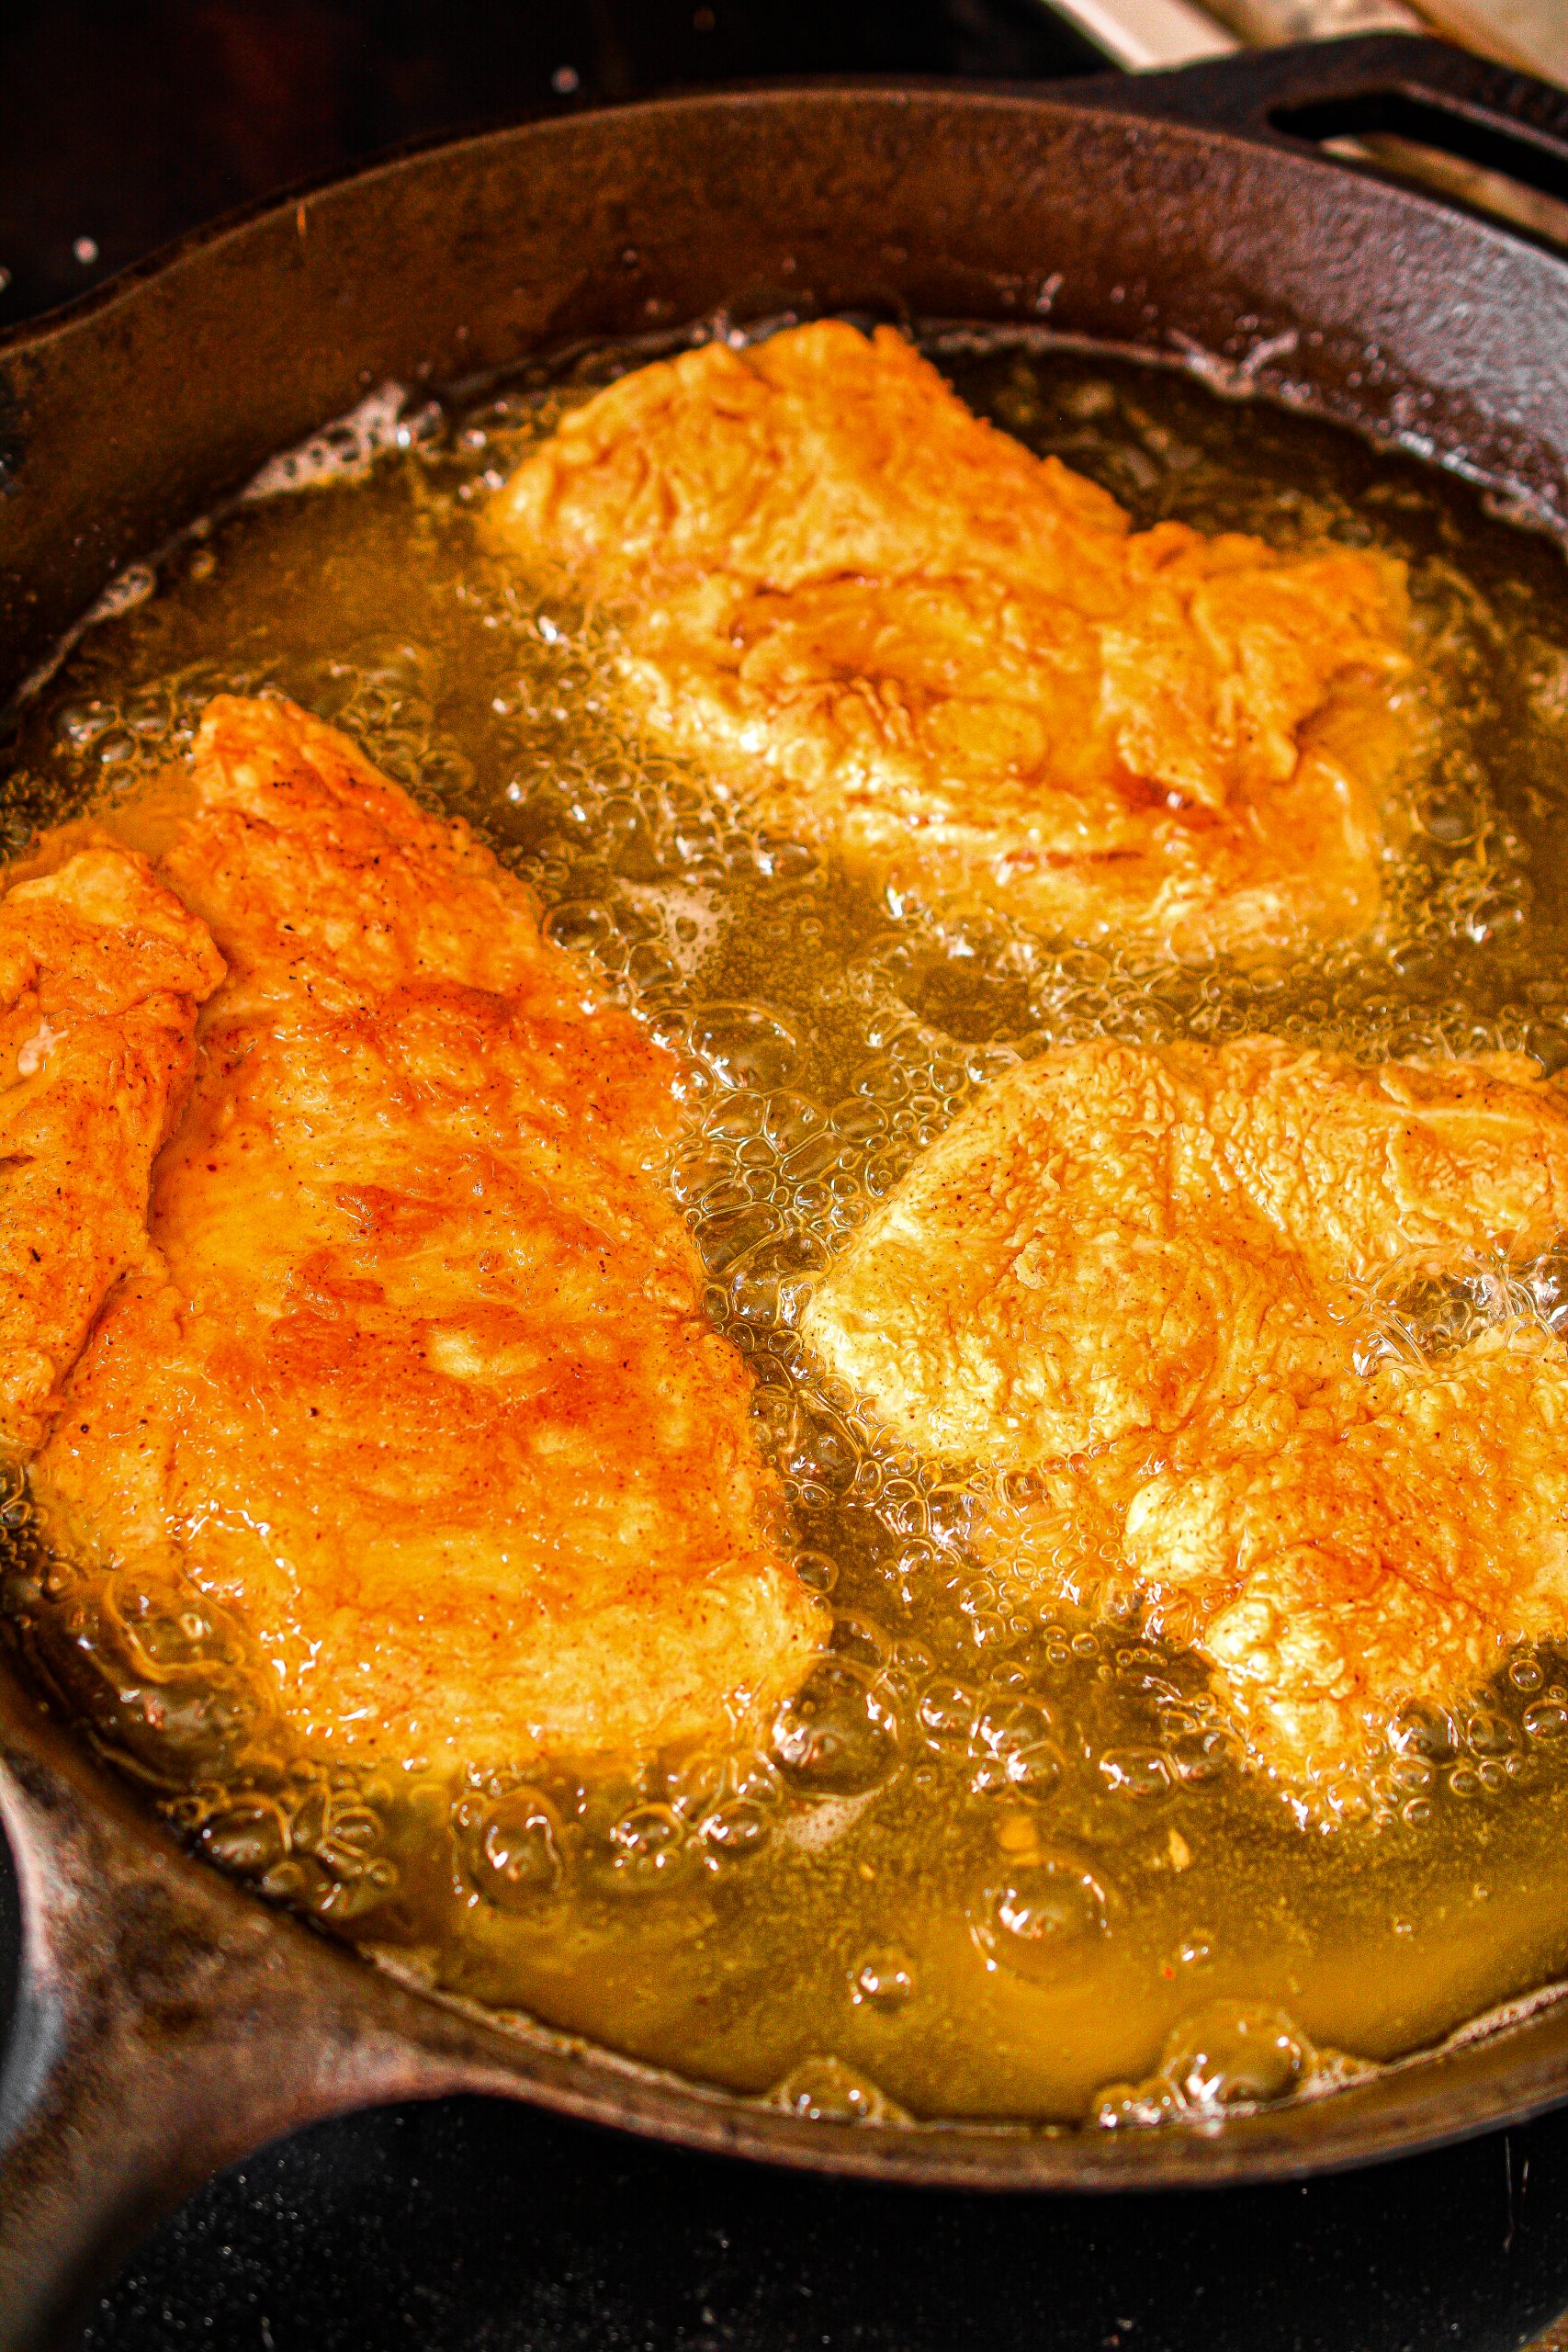 Add the chicken to the heated skillet and fry evenly on both sides until the chicken has reached an internal temperature of at least 165 degrees.